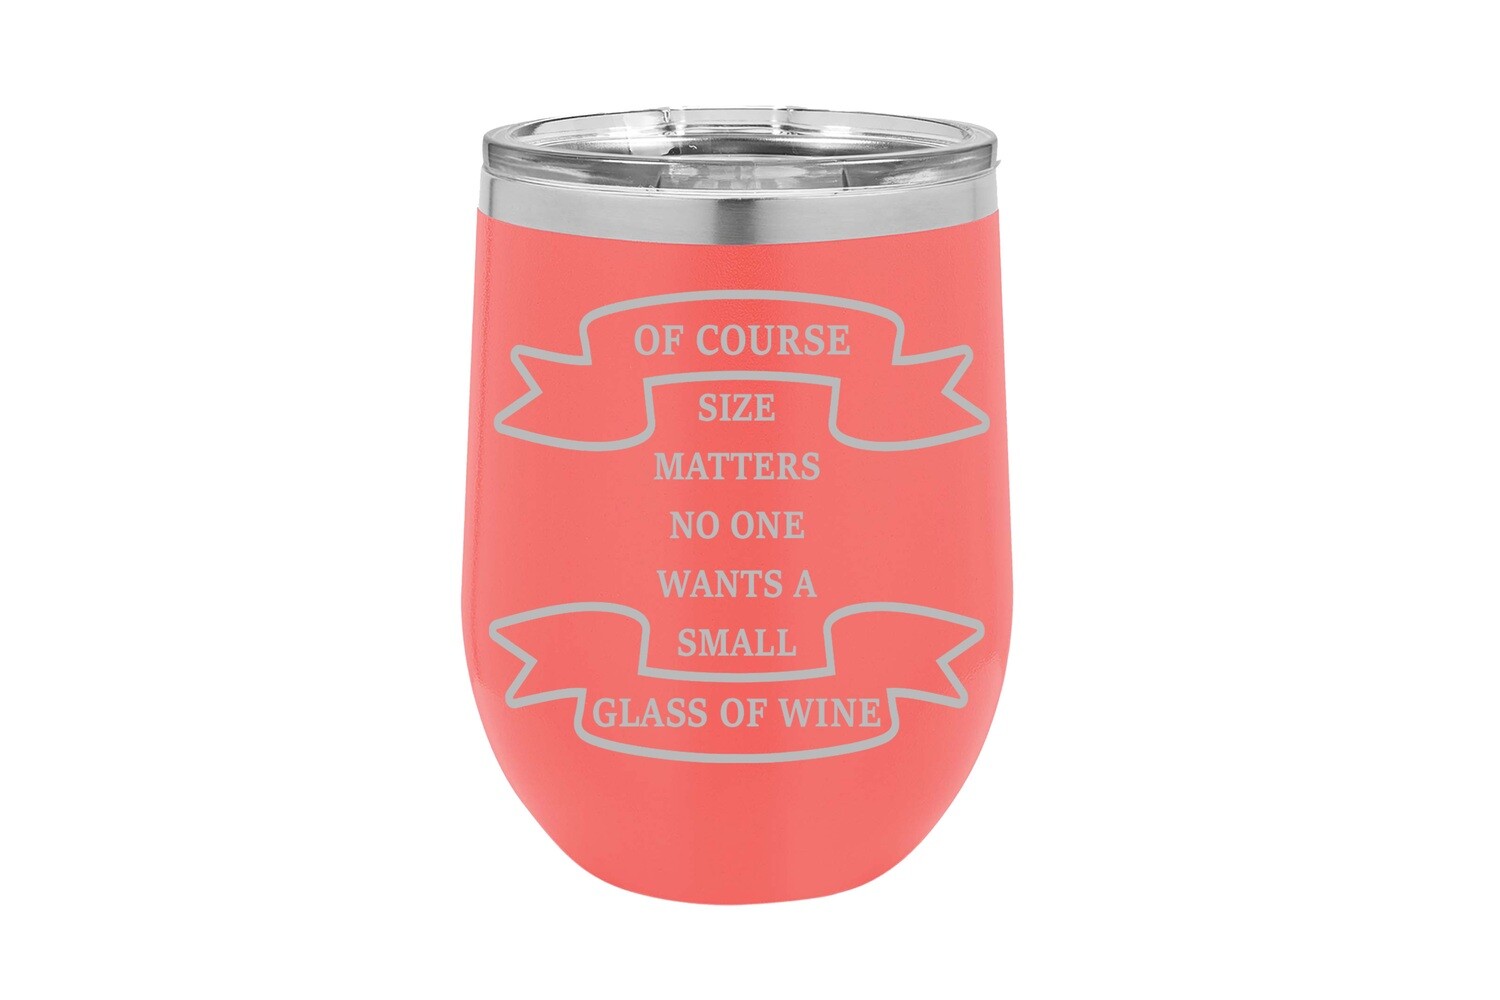 Of course size matters no one wants a small glass of wine Insulated Tumbler 12 oz